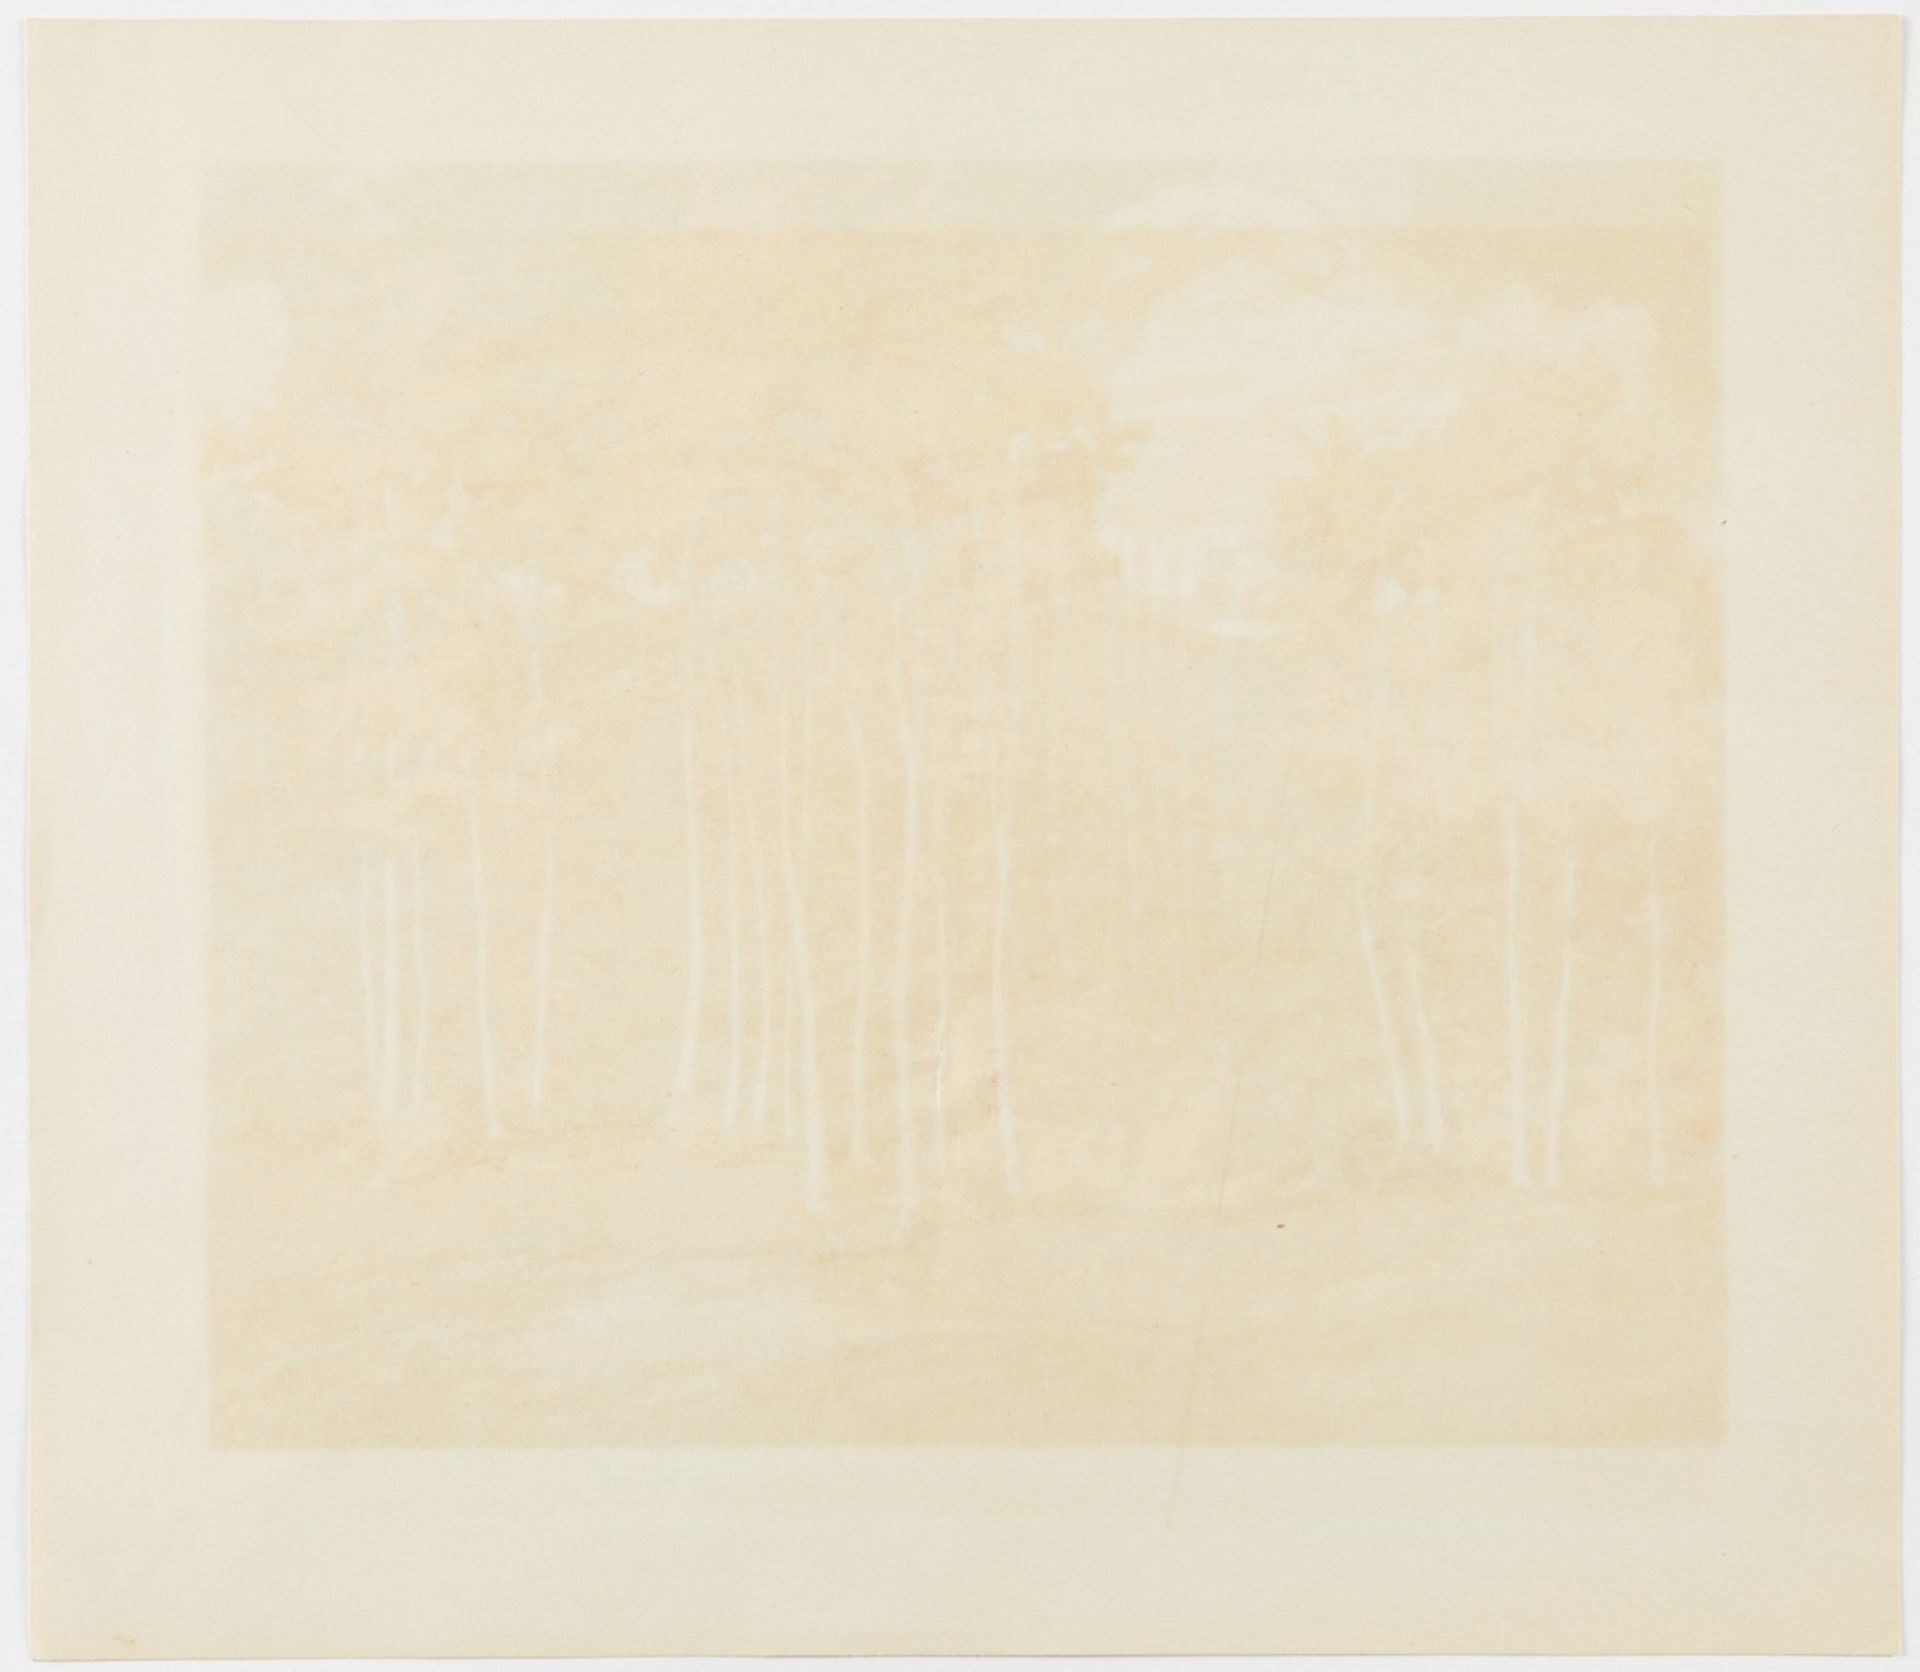 Norma Bassett Hall "Aspen and Spruce" Serigraph - Image 5 of 5